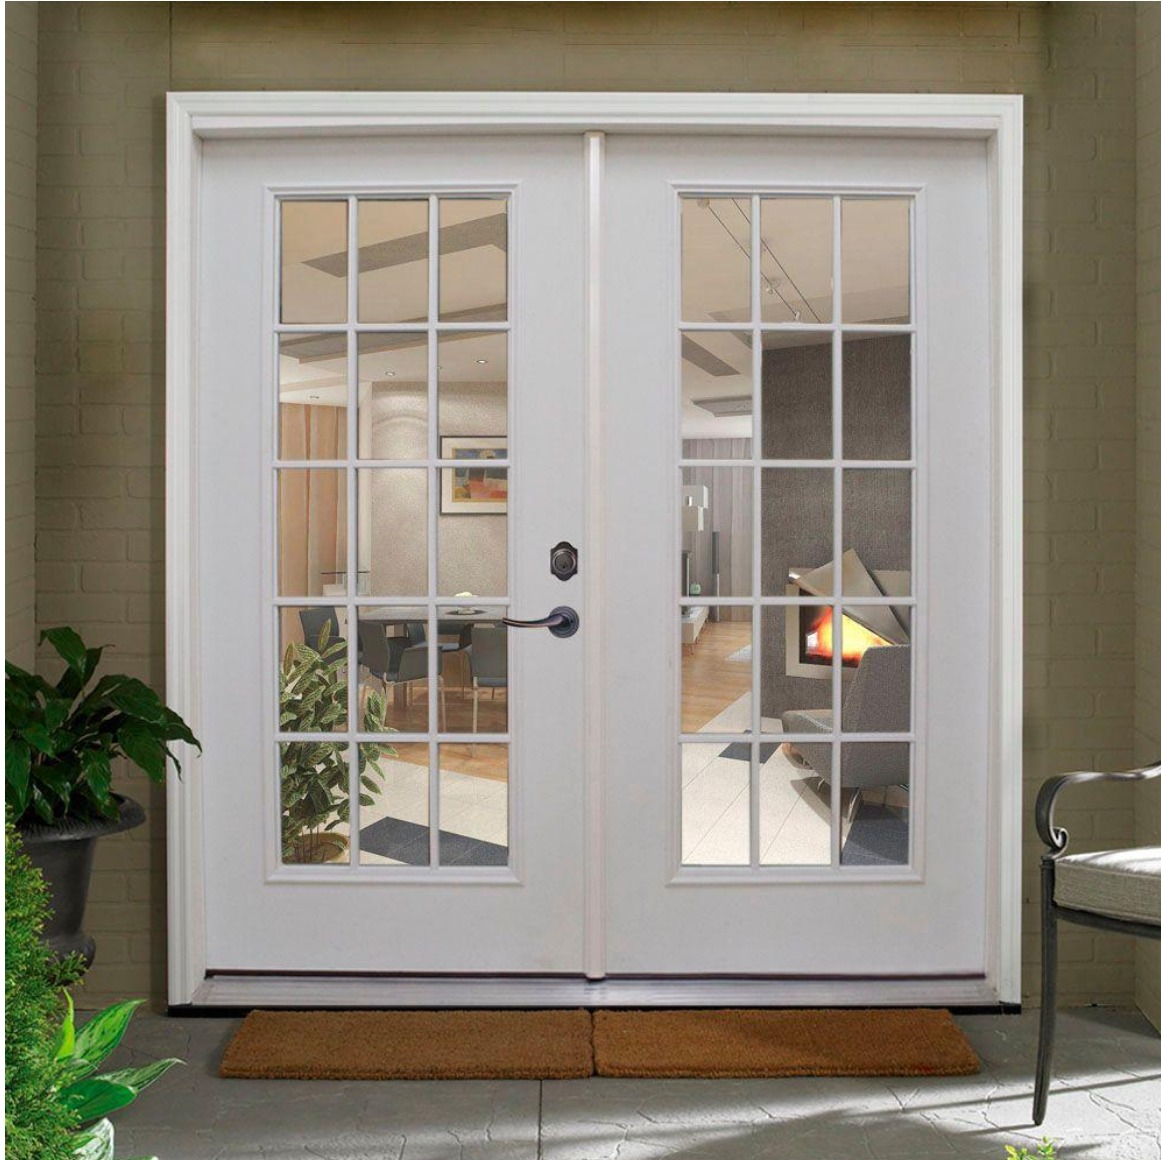 How to secure French doors?